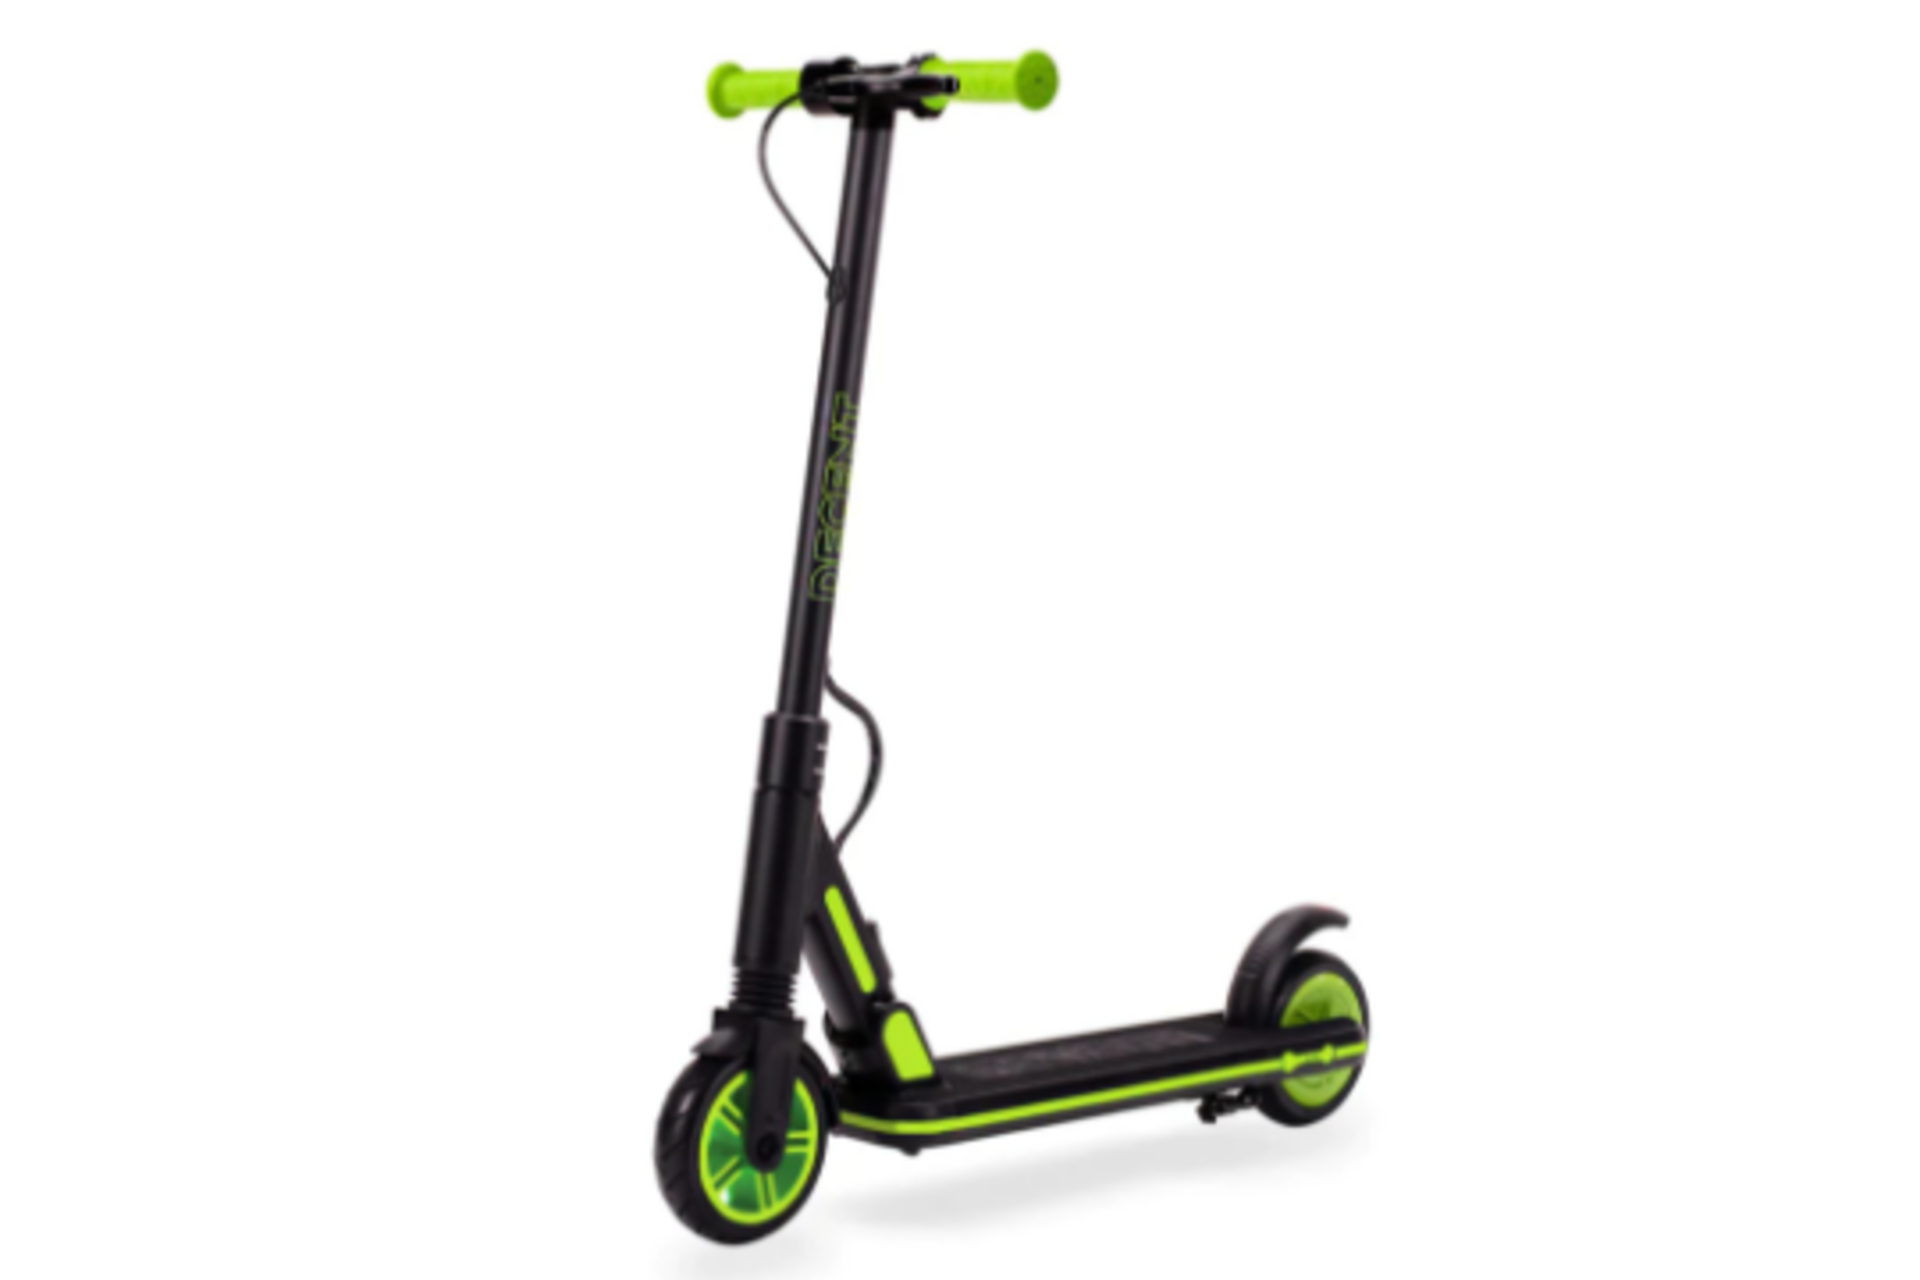 New &Boxed DECENT Kids Electric Scooter - Black/Green. Let your kids zip around in style. With